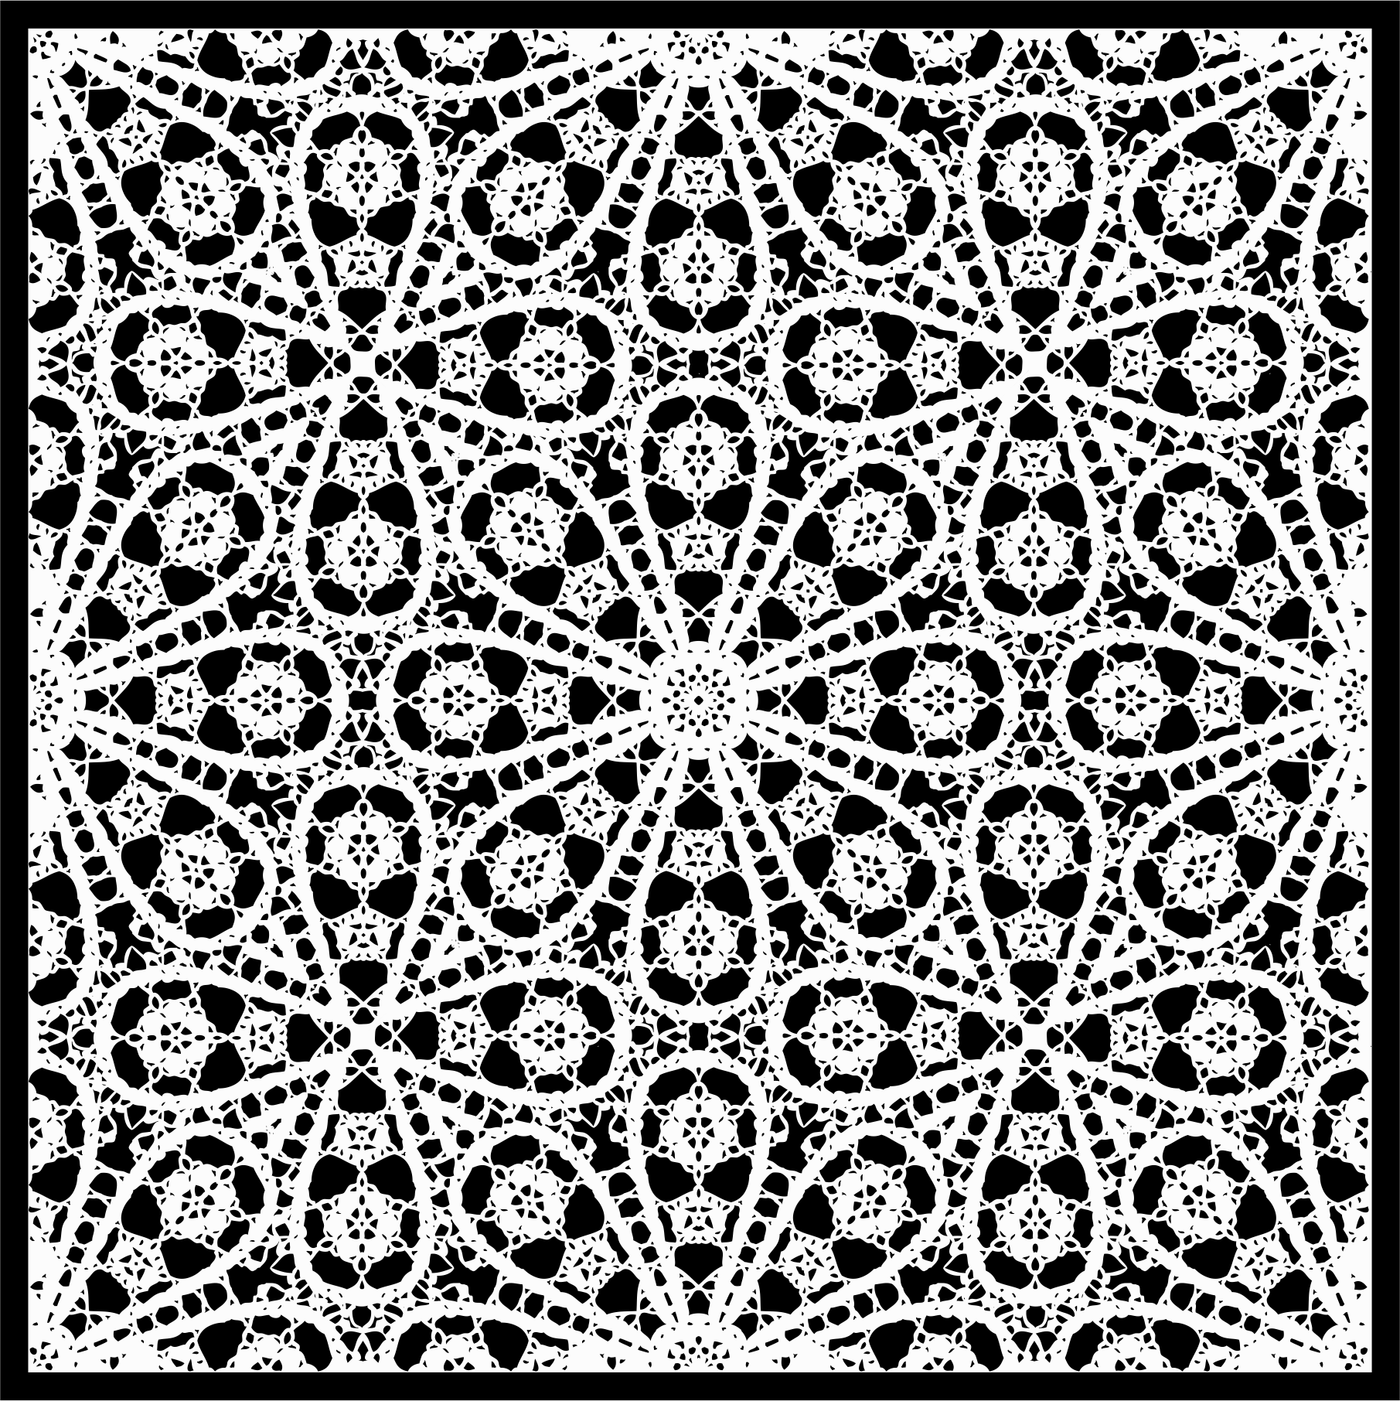 Adhesive Patterned Vinyl - White Ink Lace 10